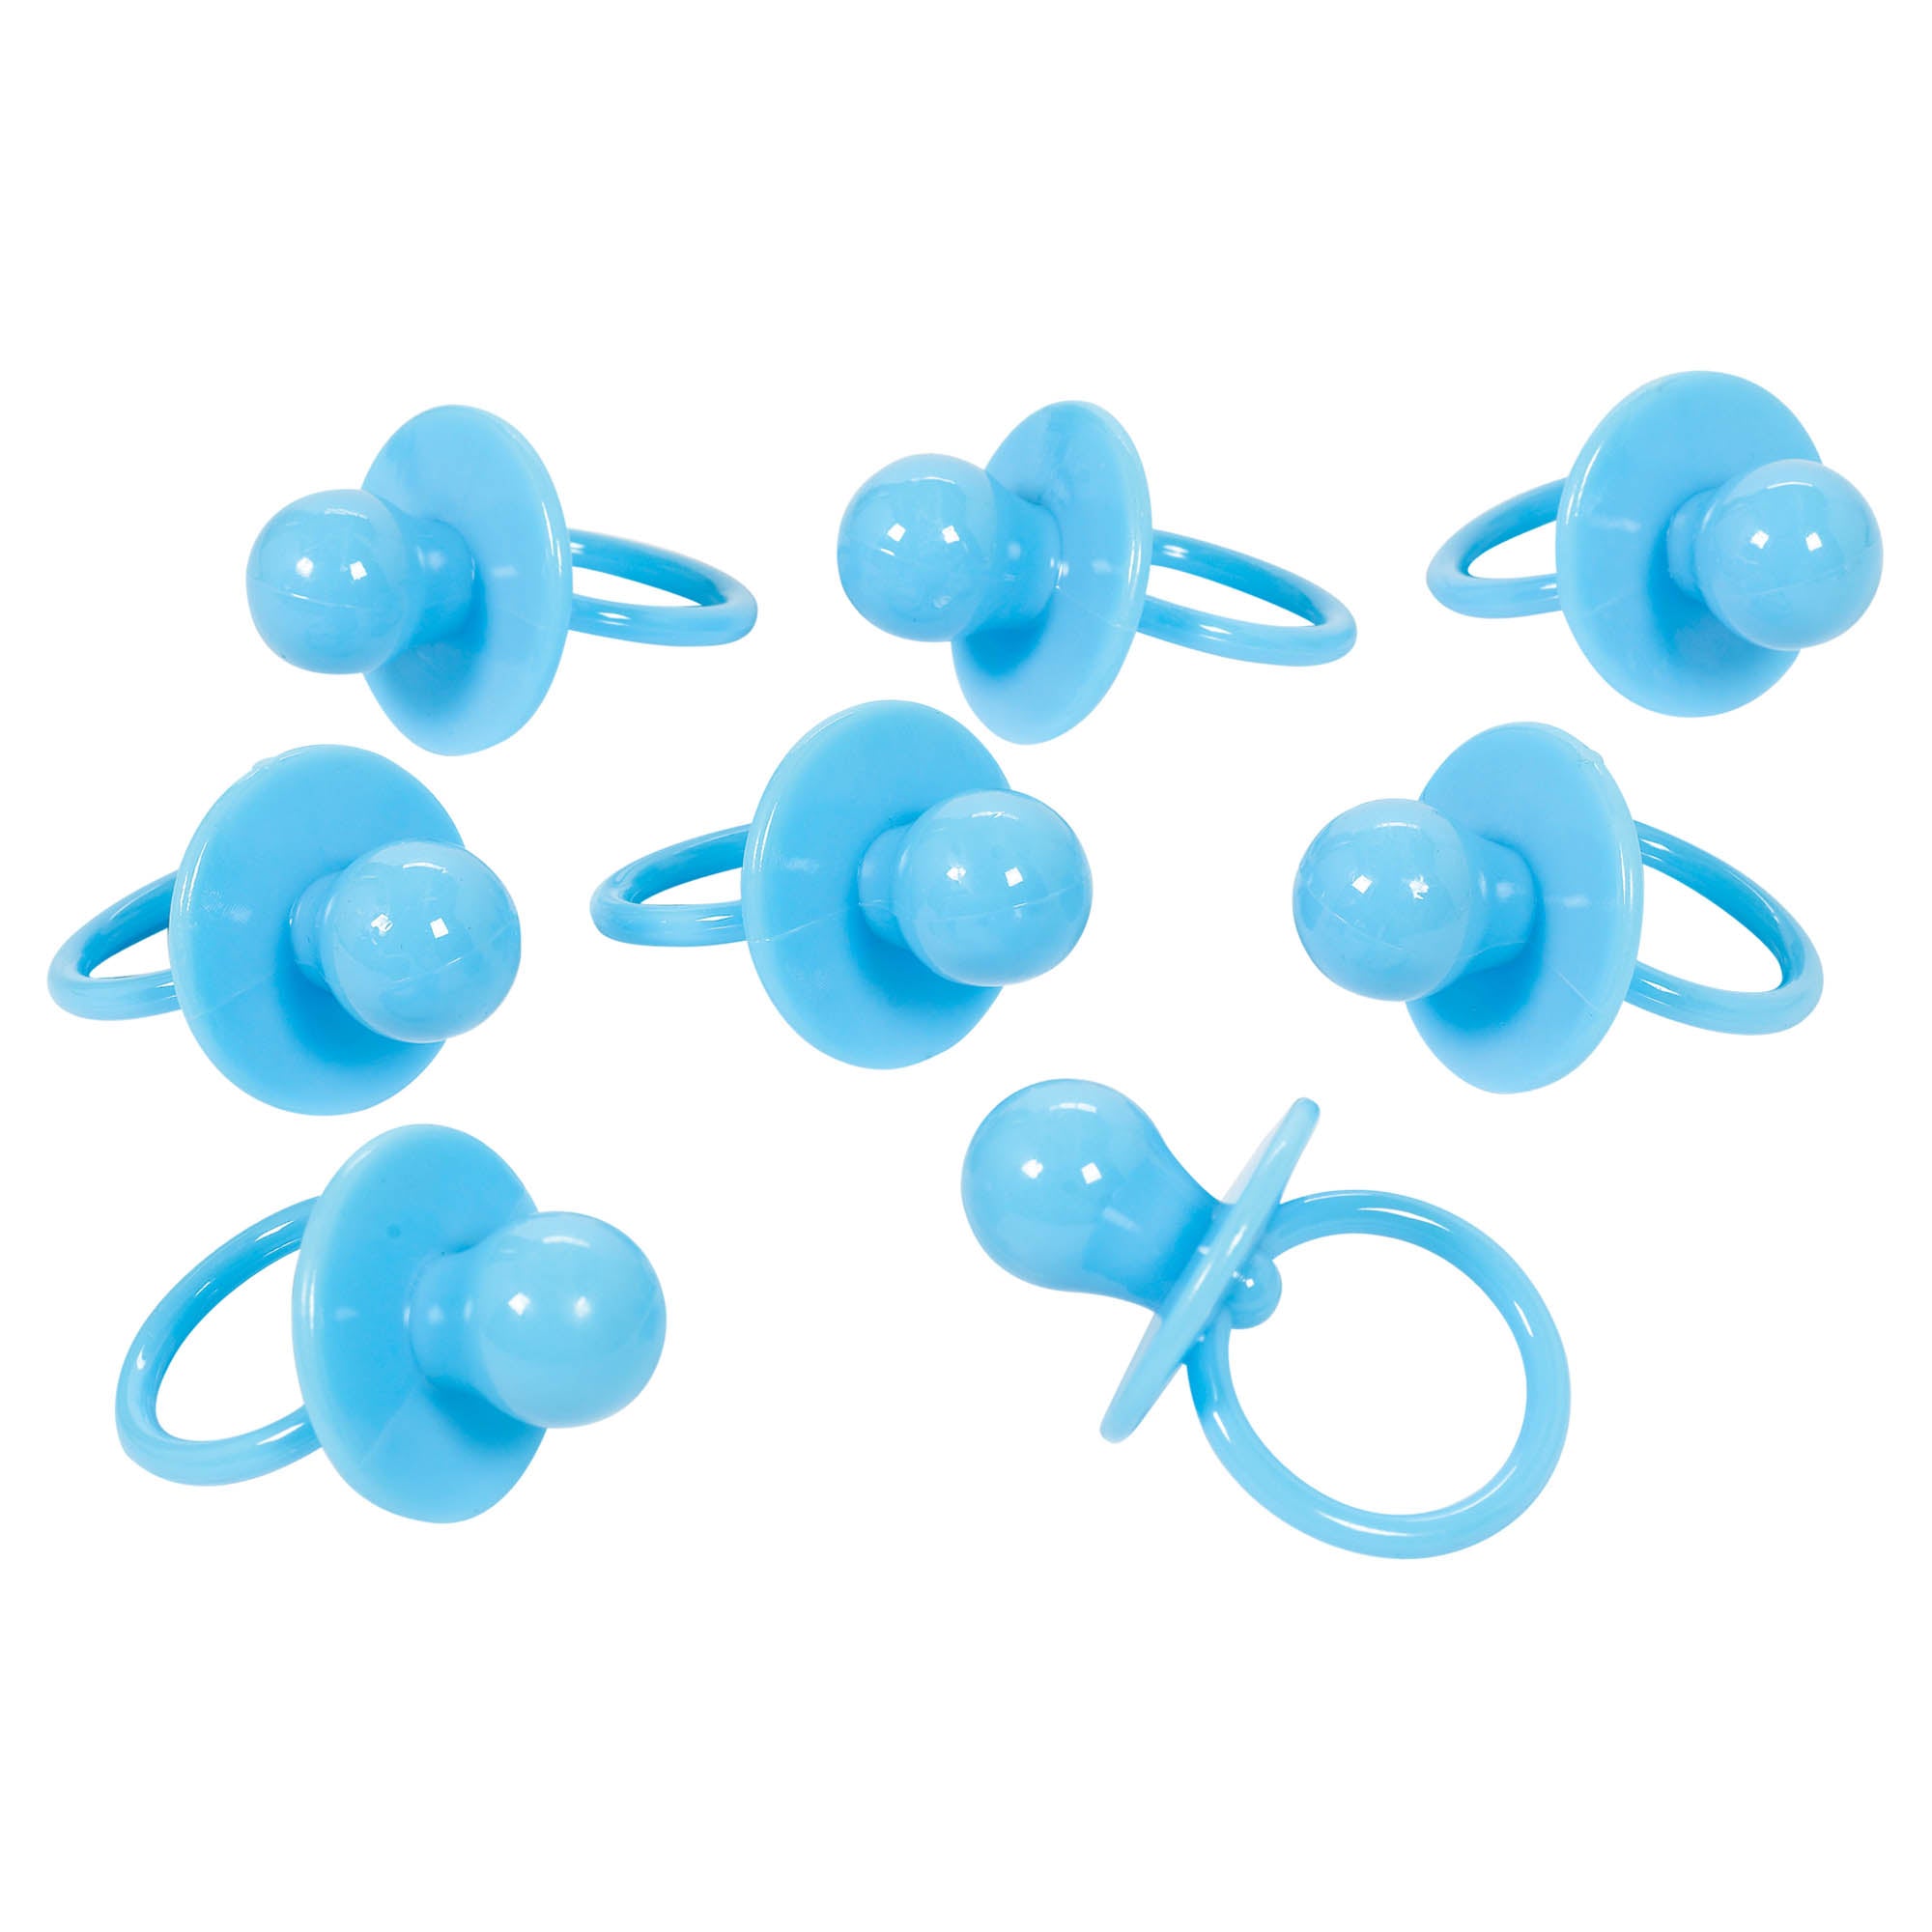 8 Large Pacifier Charm Favors  2.375x1.375in  Blue